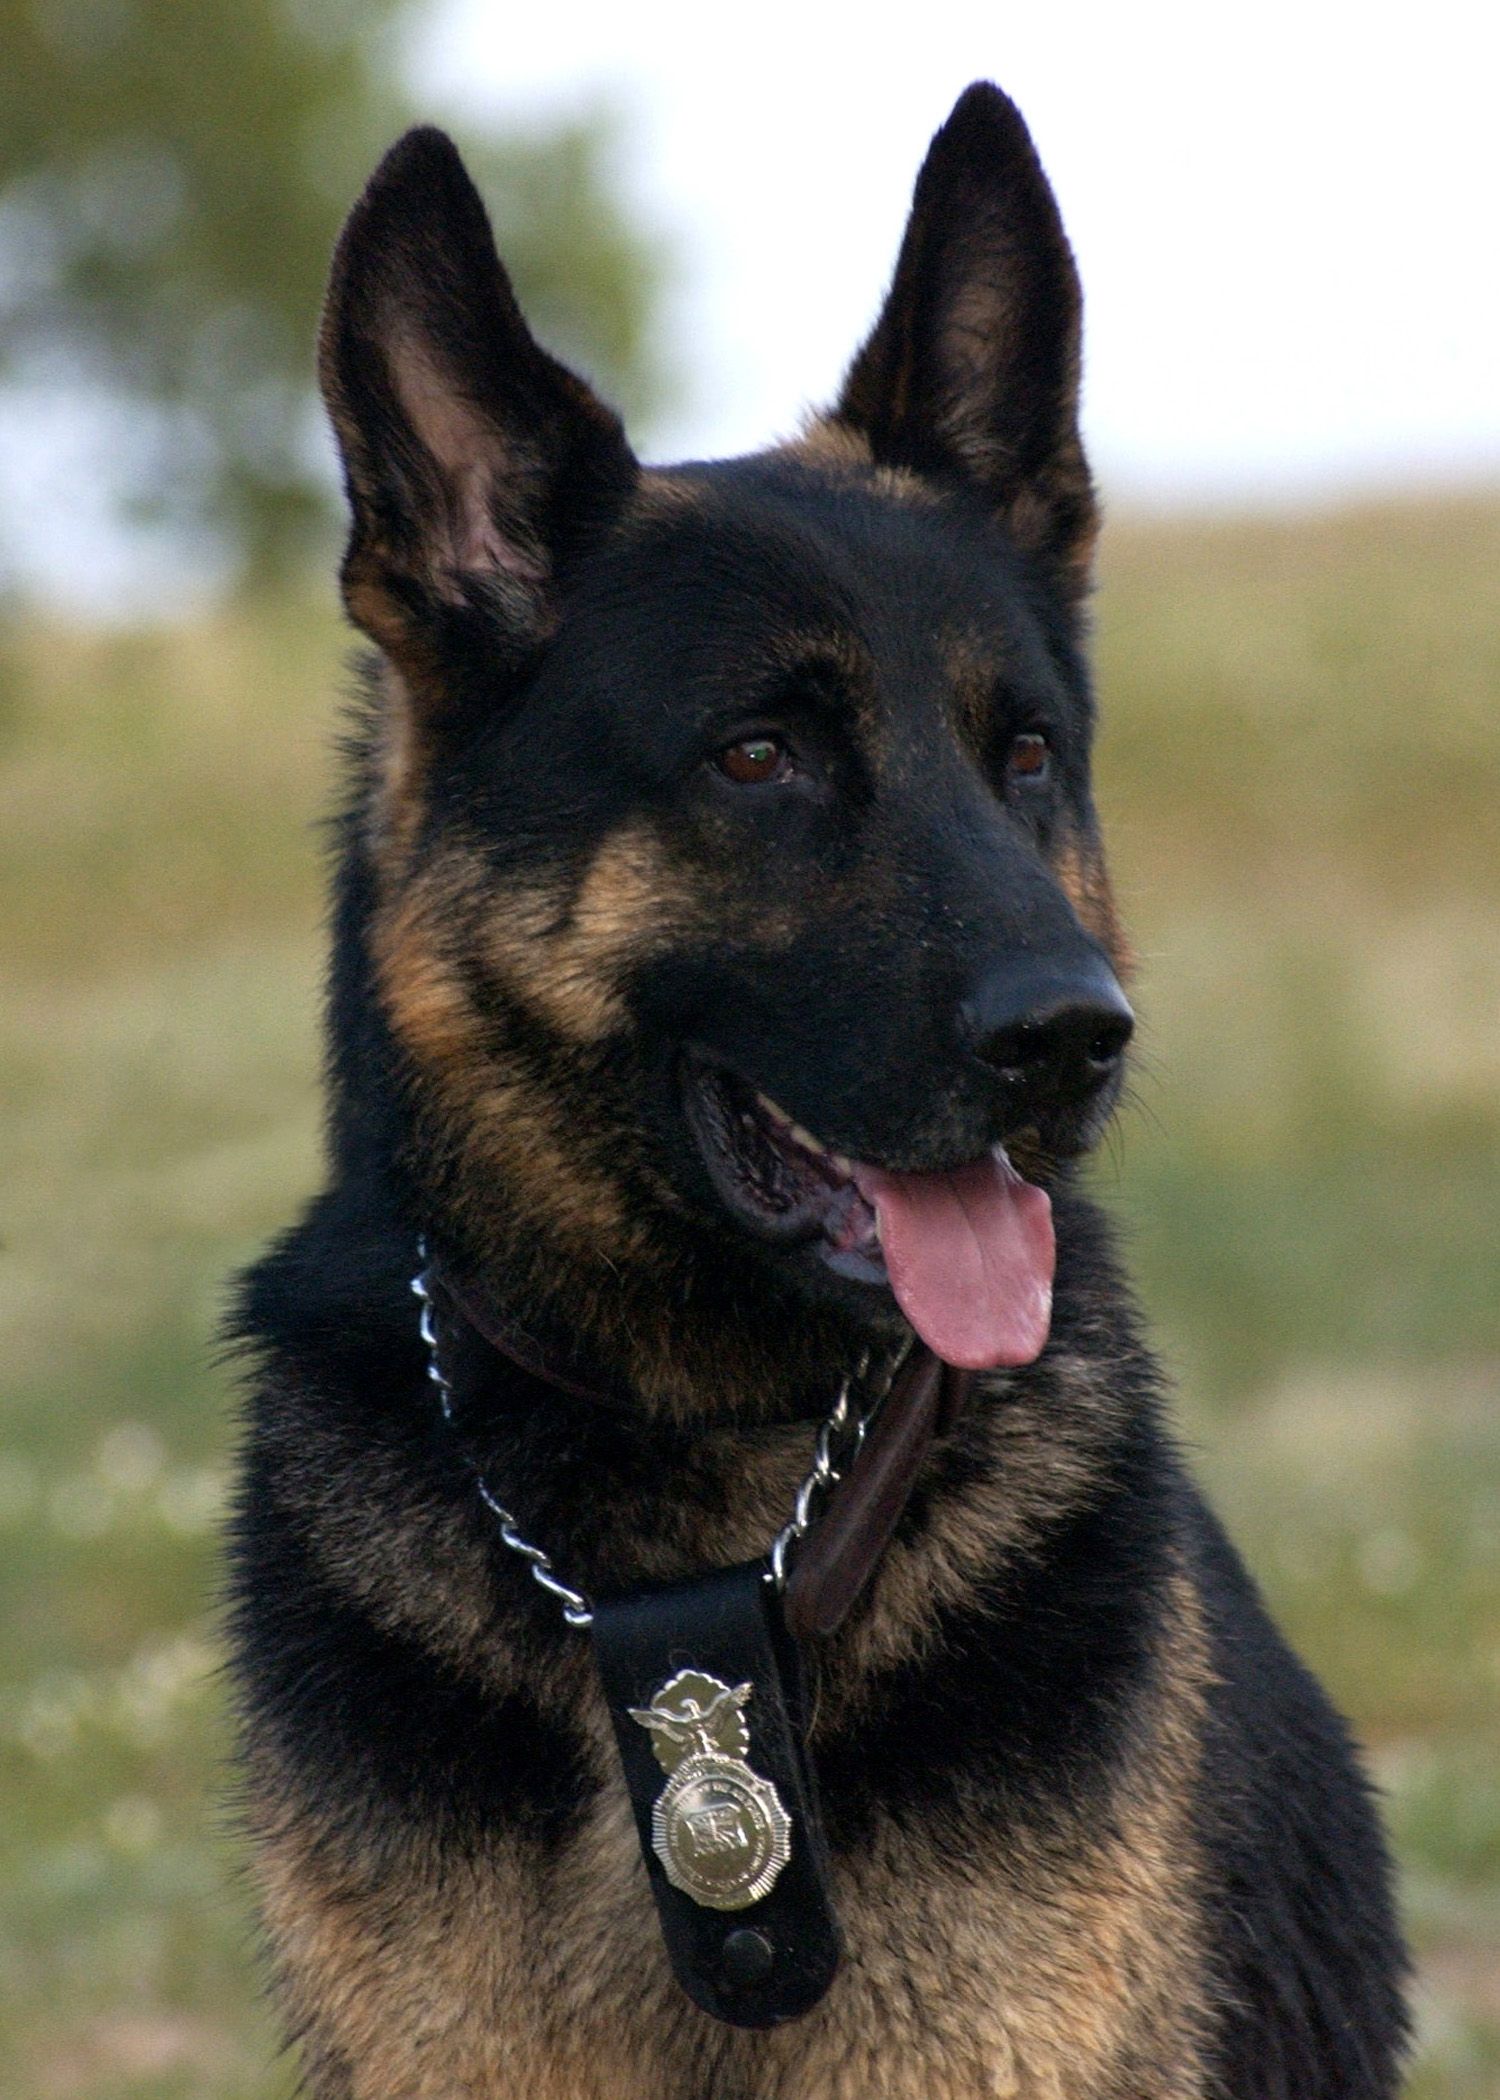 Dansun Photos  This is Amok hes a K9 police dog He looks really happy  and friendly here but trust me get on his bad side and youll be in a world